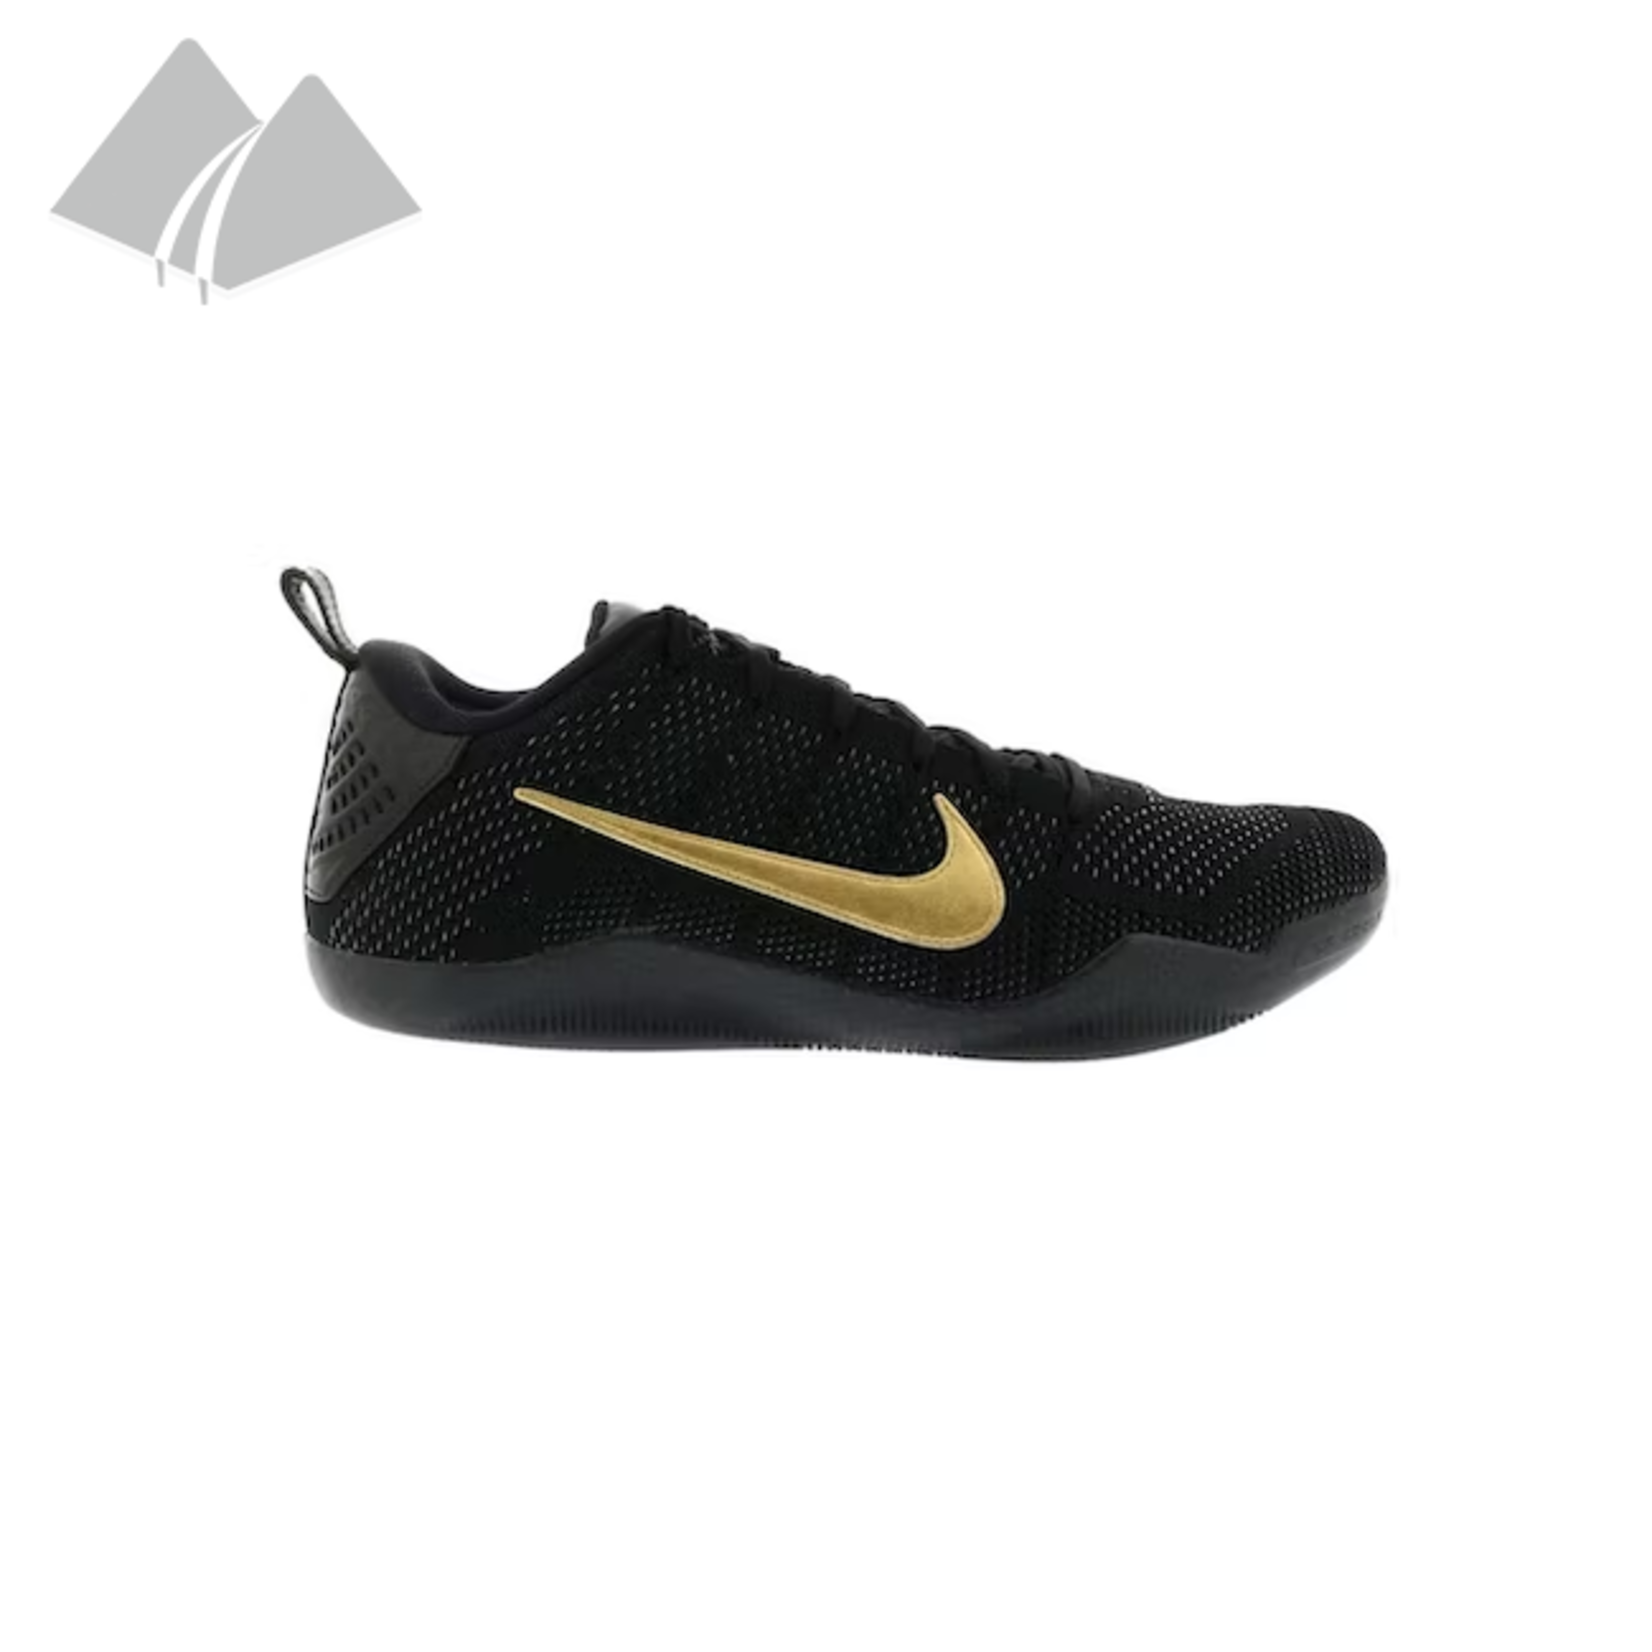 Nike Kobe 11 Low (M) Black Mamba Collection Fade to Black - The Valley